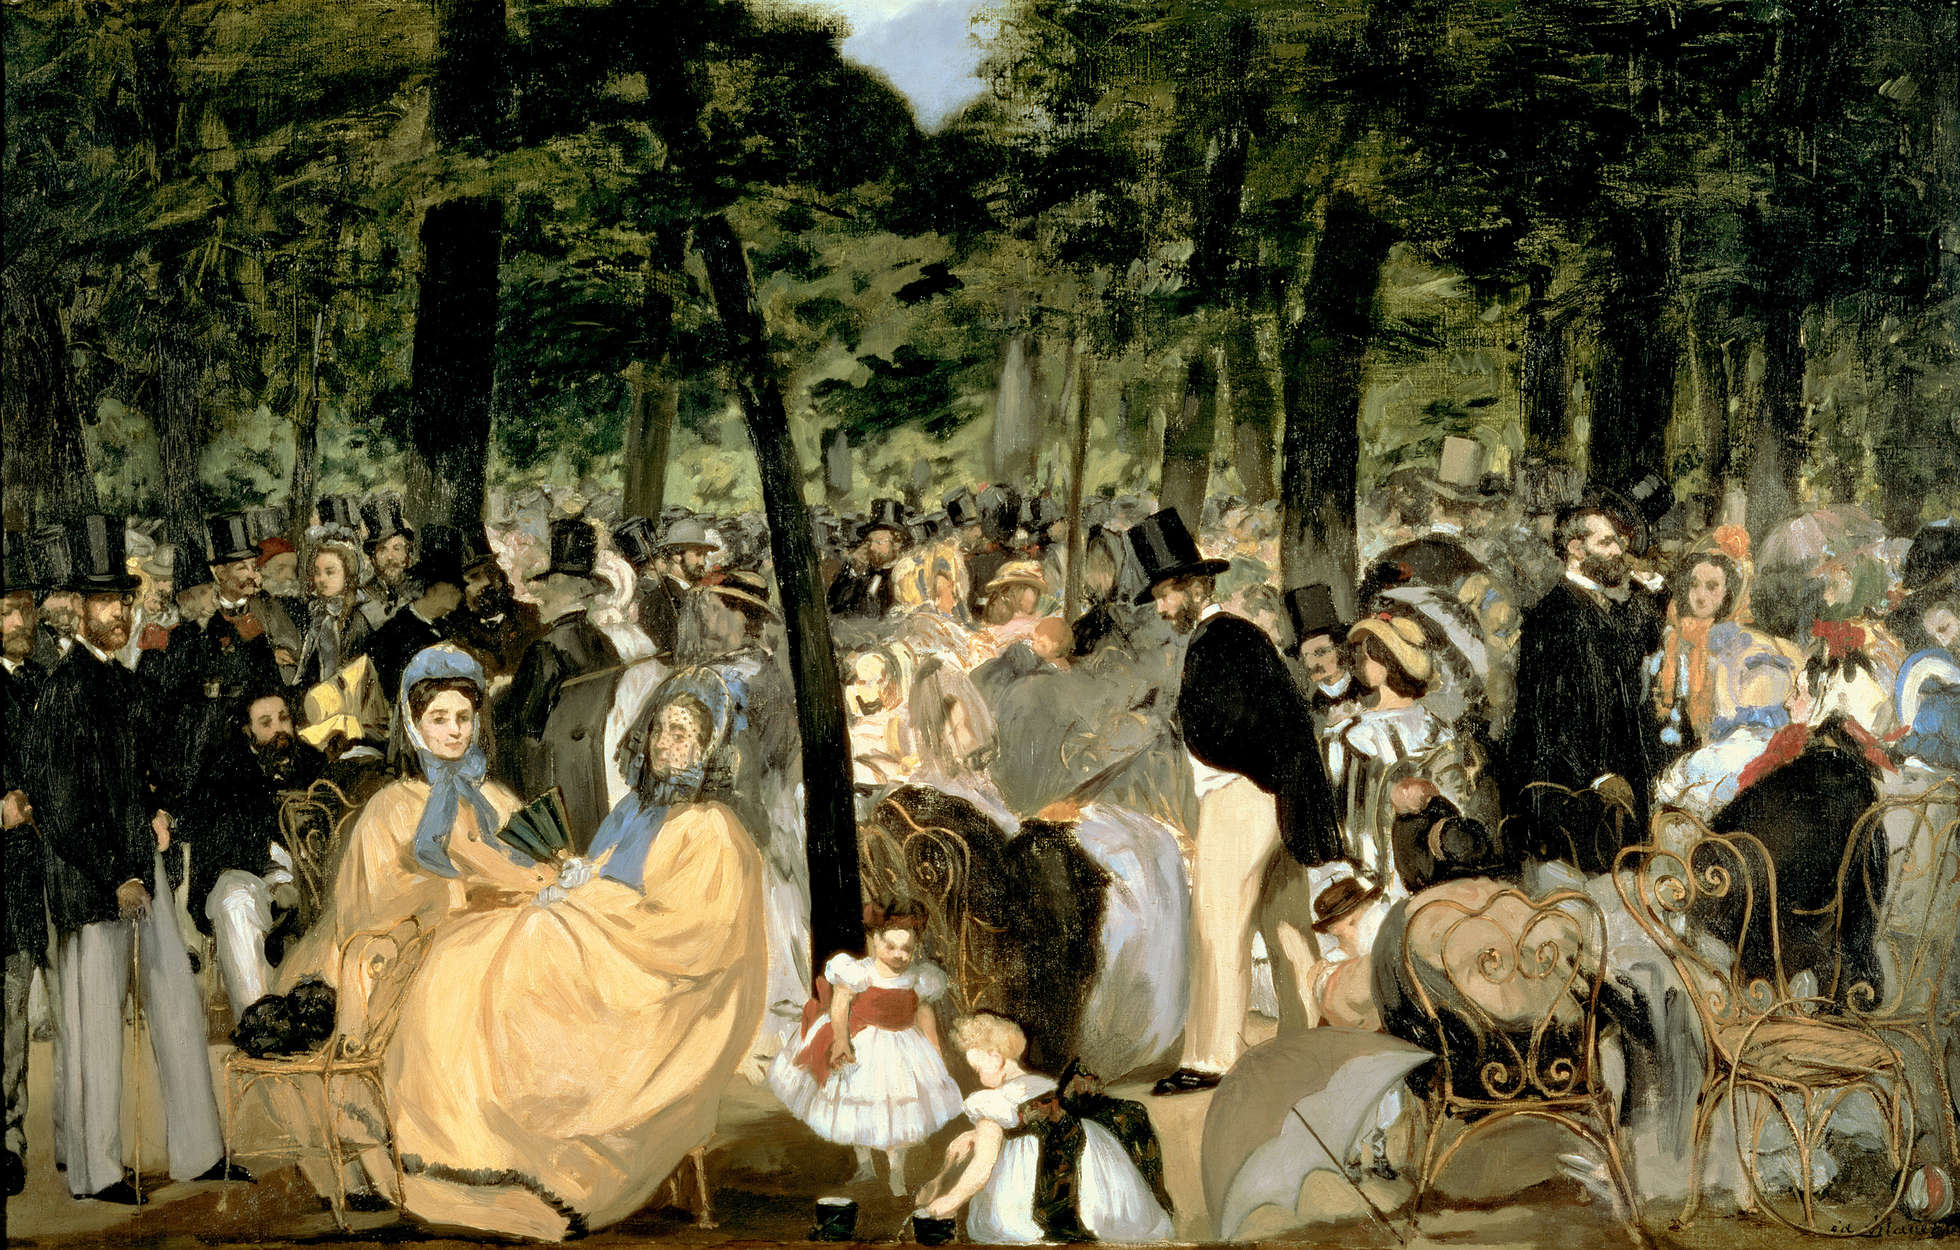             Photo wallpaper "Music in the gardens of the Tuileries" by Edouard Manet
        